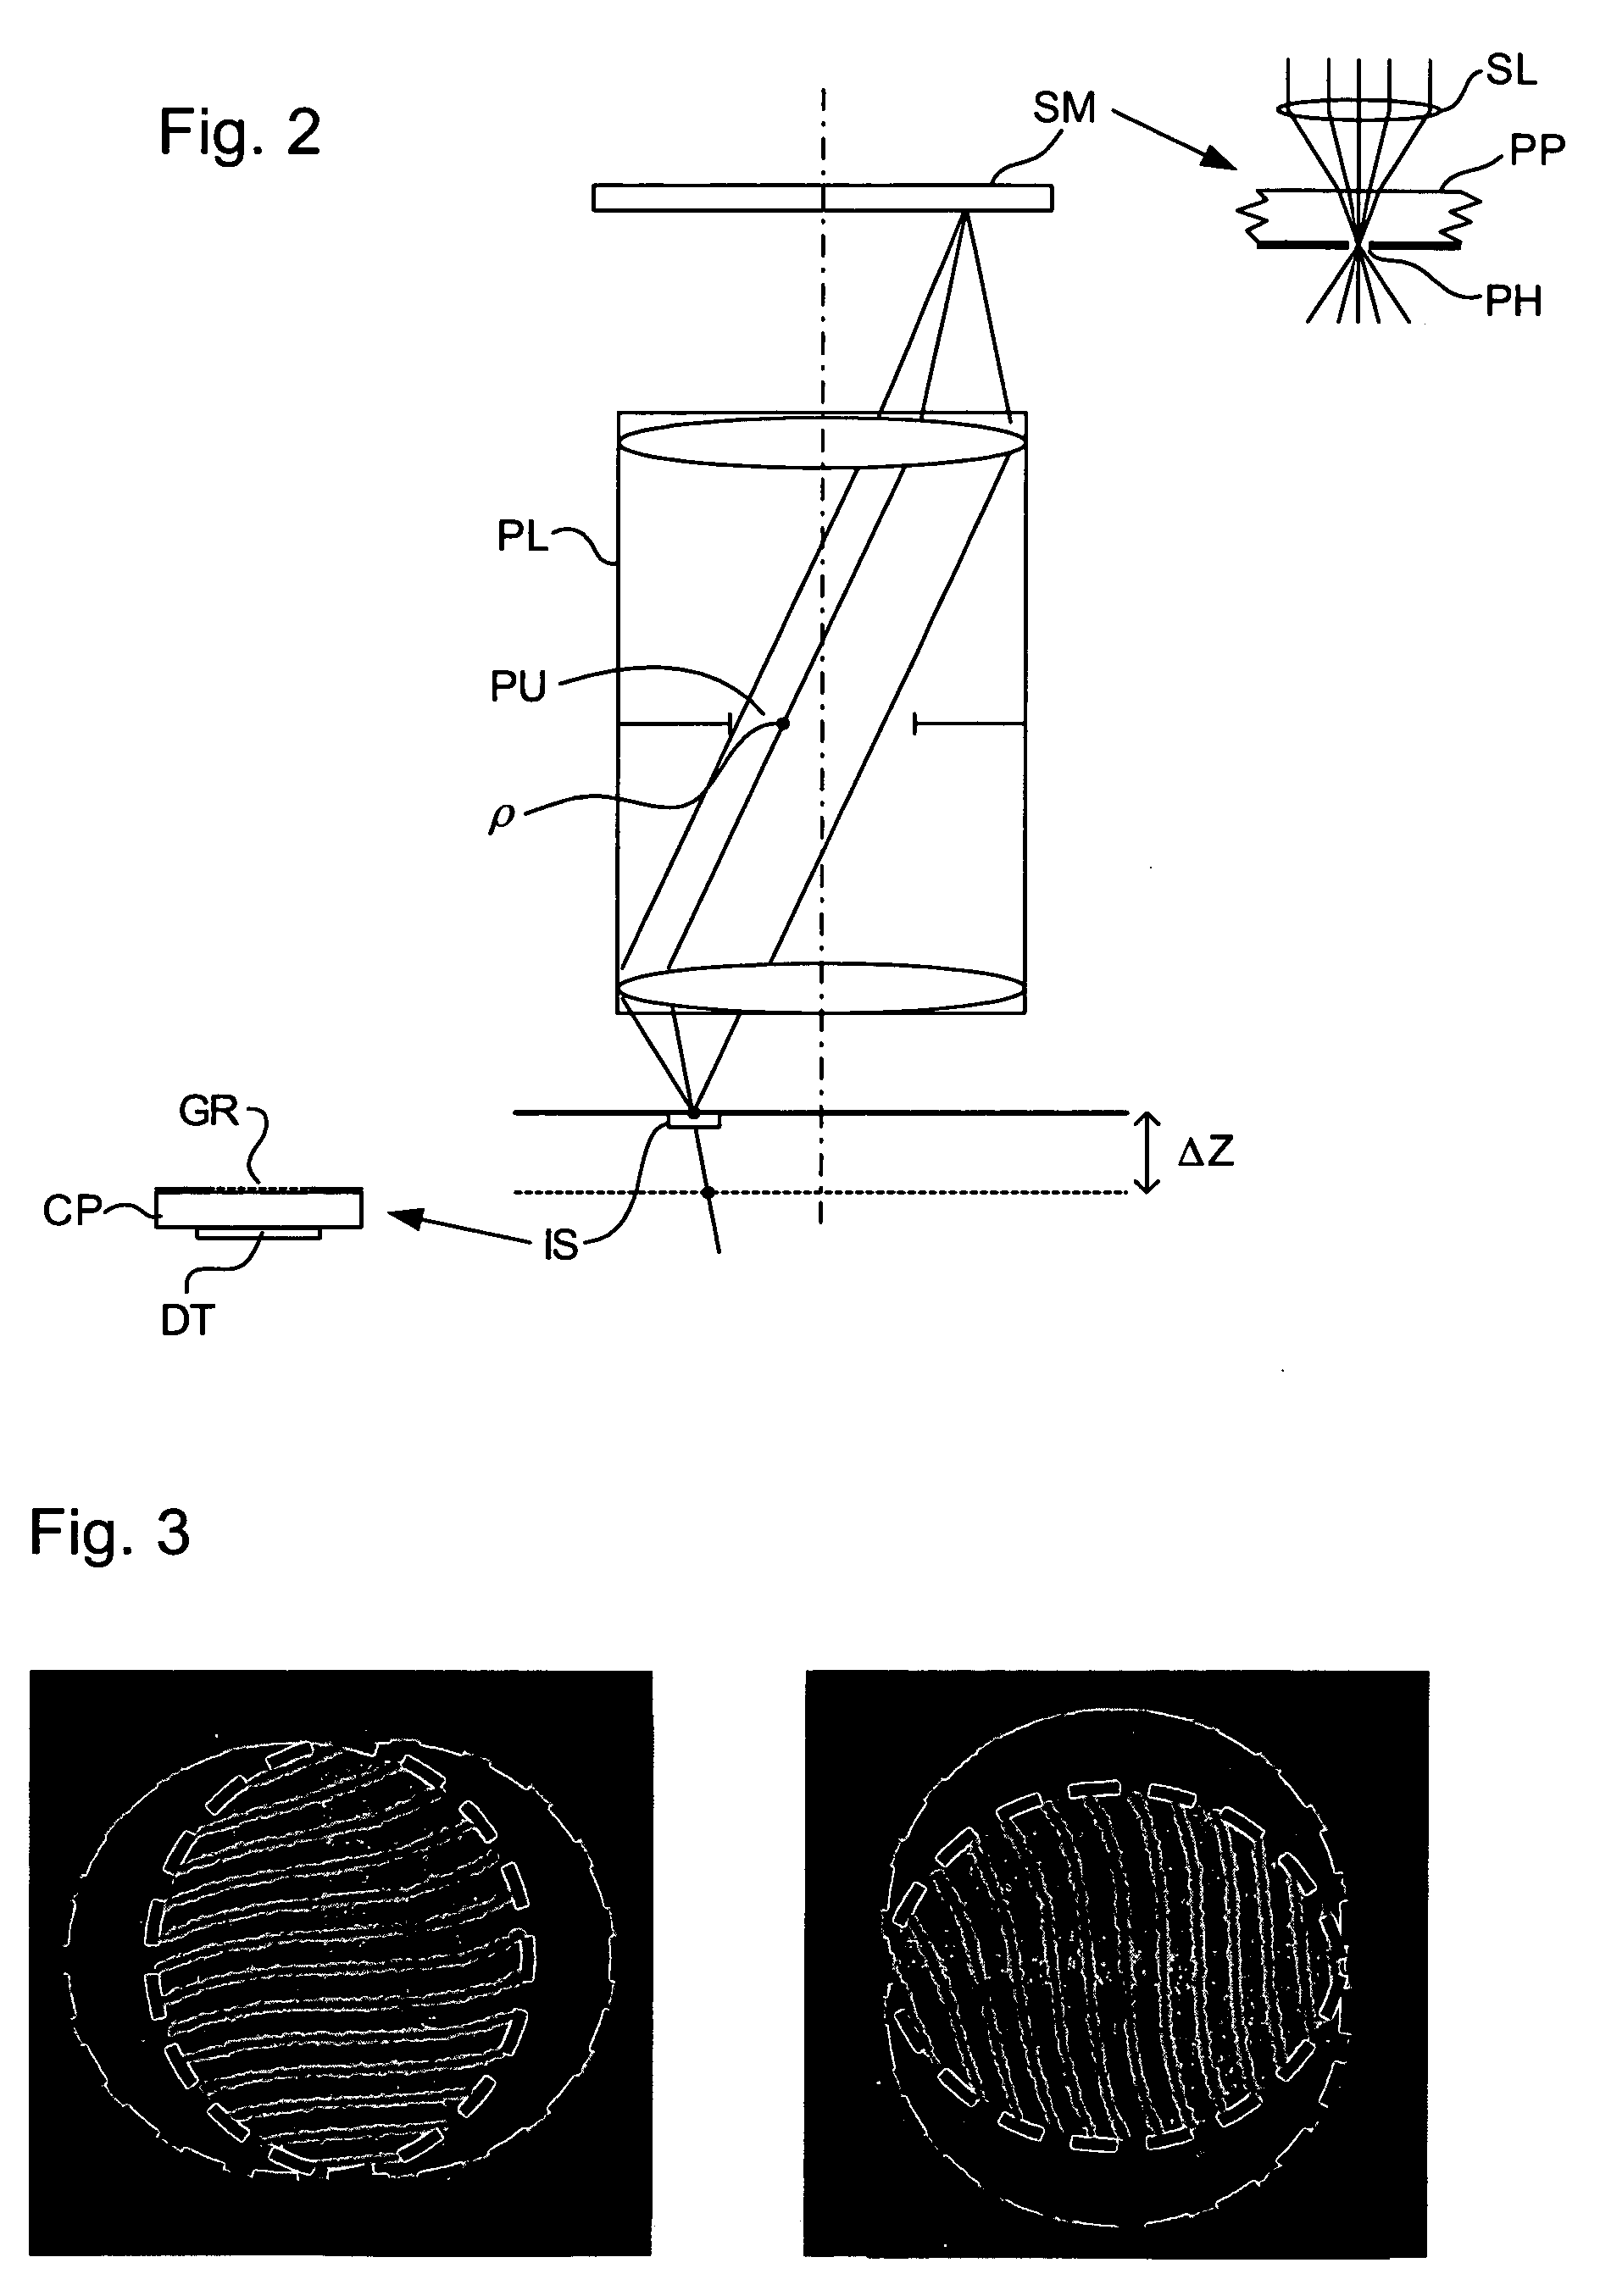 Lithographic apparatus, method of determining properties thereof and computer program